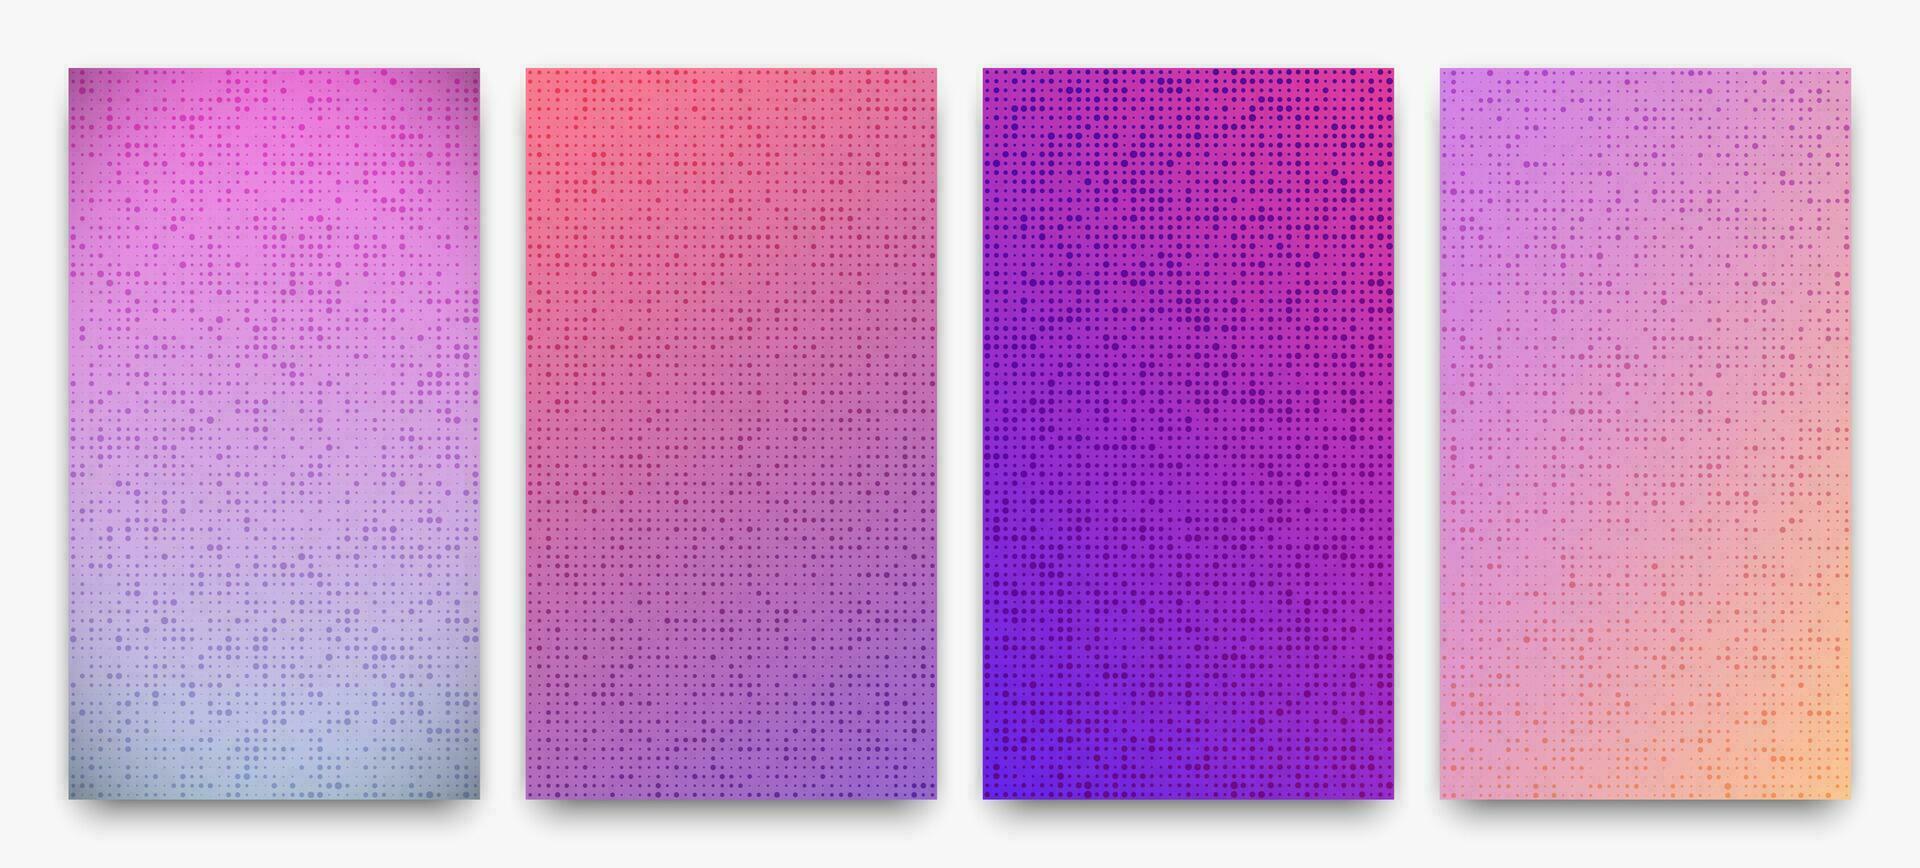 Abstract gradient geometric background of squares vector